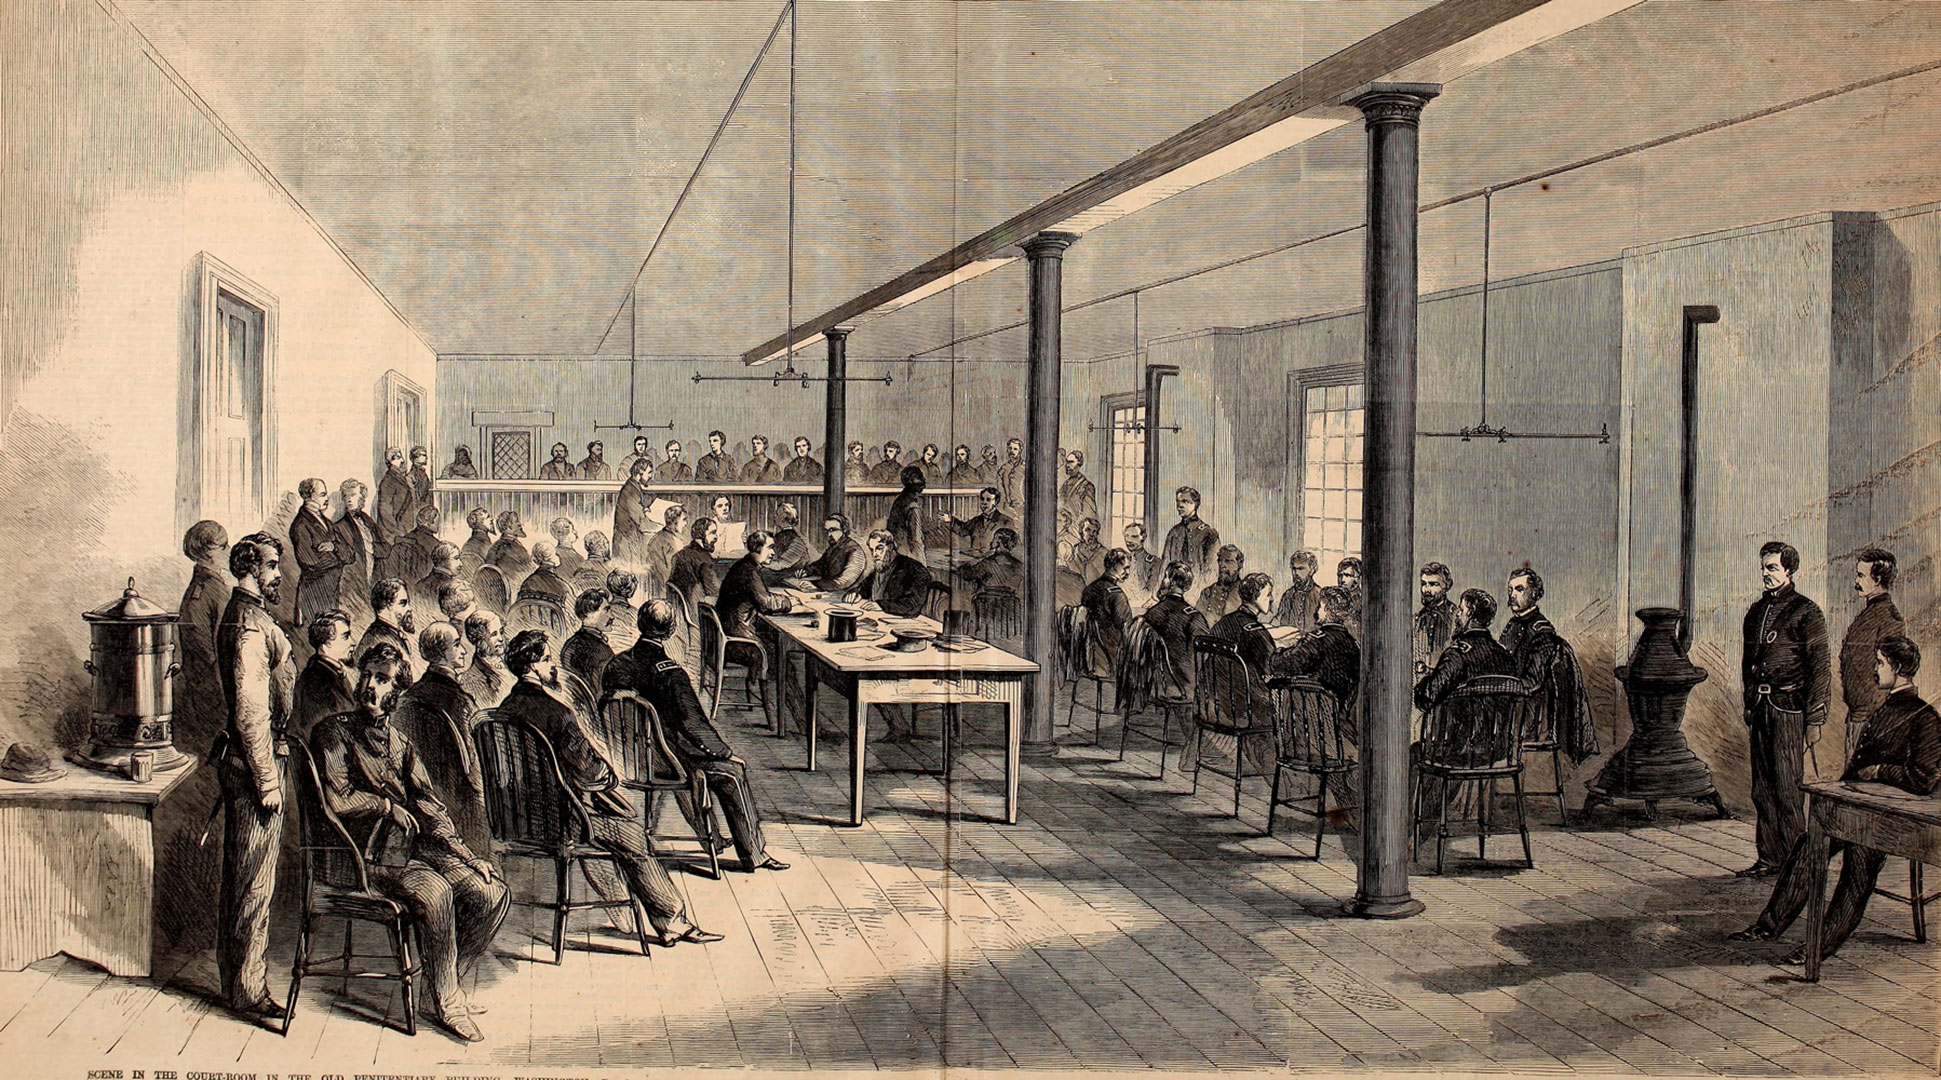 Illustration of more than 30 men gathered around tables and dozens more standing in a nearby gallery during the military tribunal for those accused of conspiracy in the Lincoln assassination.